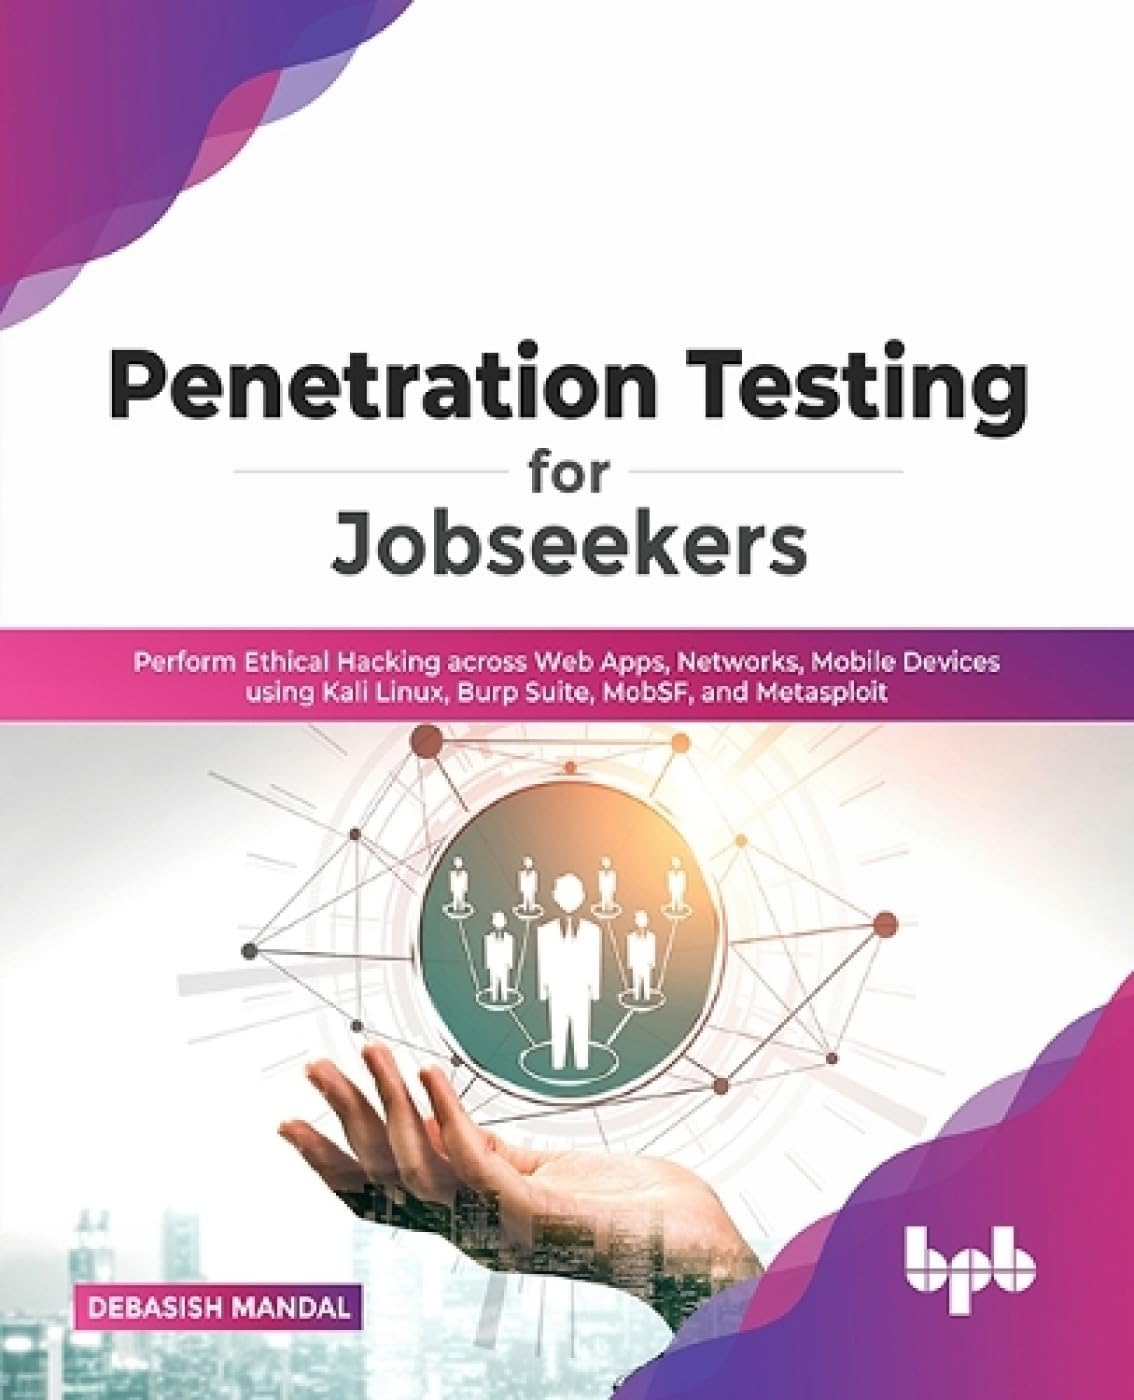 Penetration Testing for Jobseekers: Perform Ethical Hacking across Web Apps, Networks, Mobile Devices using Kali Linux, Burp Suite, MobSF, and Metasploit by Debasish Mandal